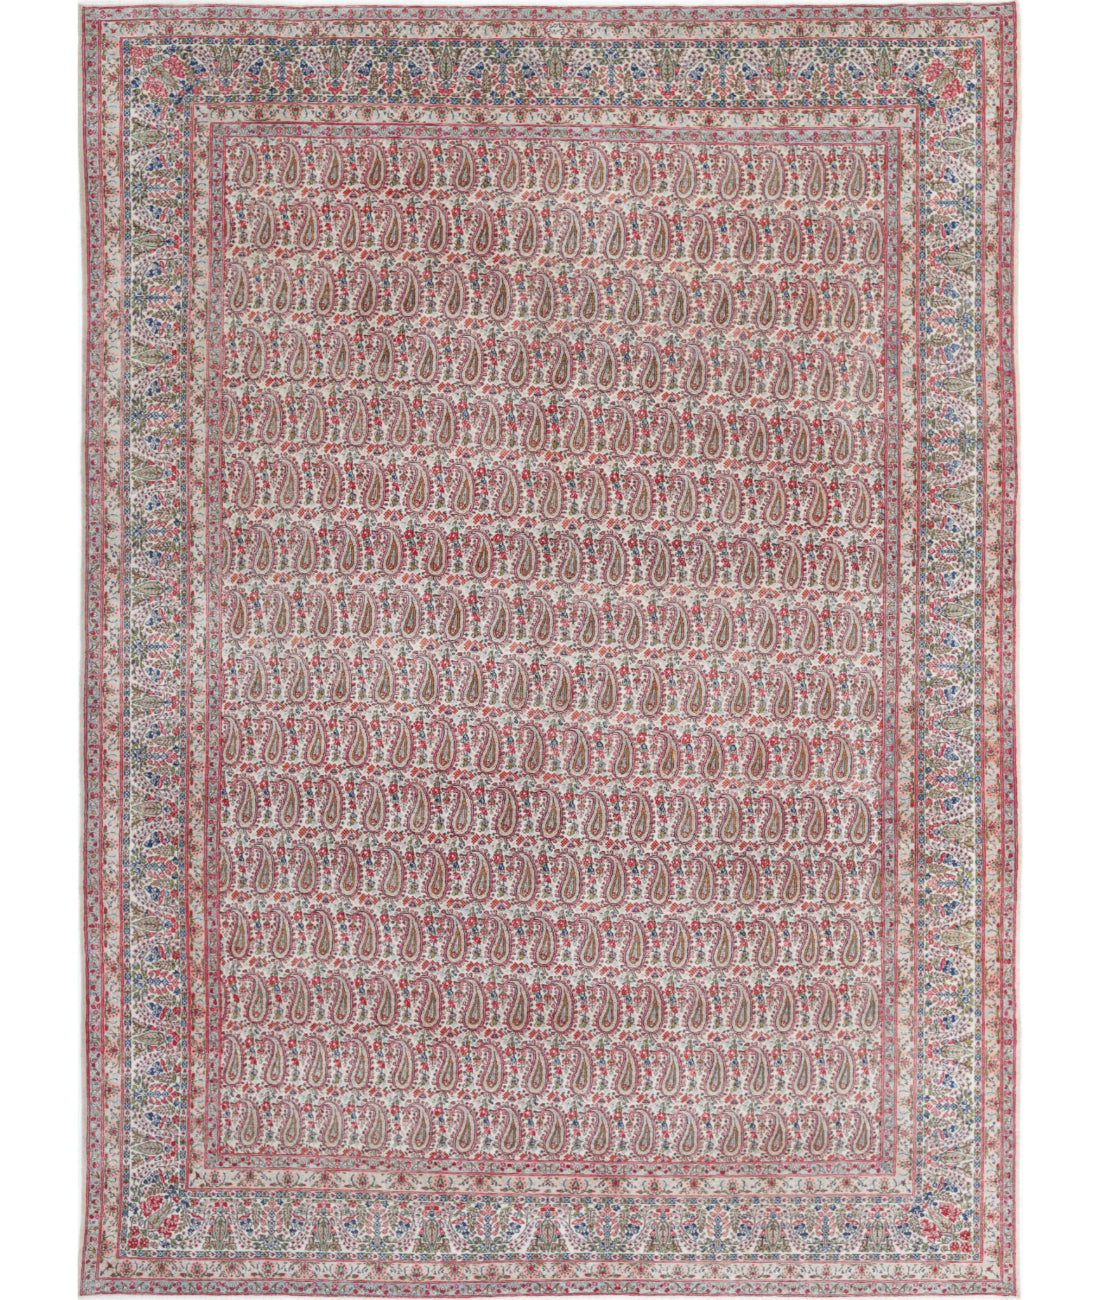 Hand Knotted Persian Moud Wool Rug - 8'9'' x 12'2'' 8'9'' x 12'2'' (263 X 365) / Beige / Red